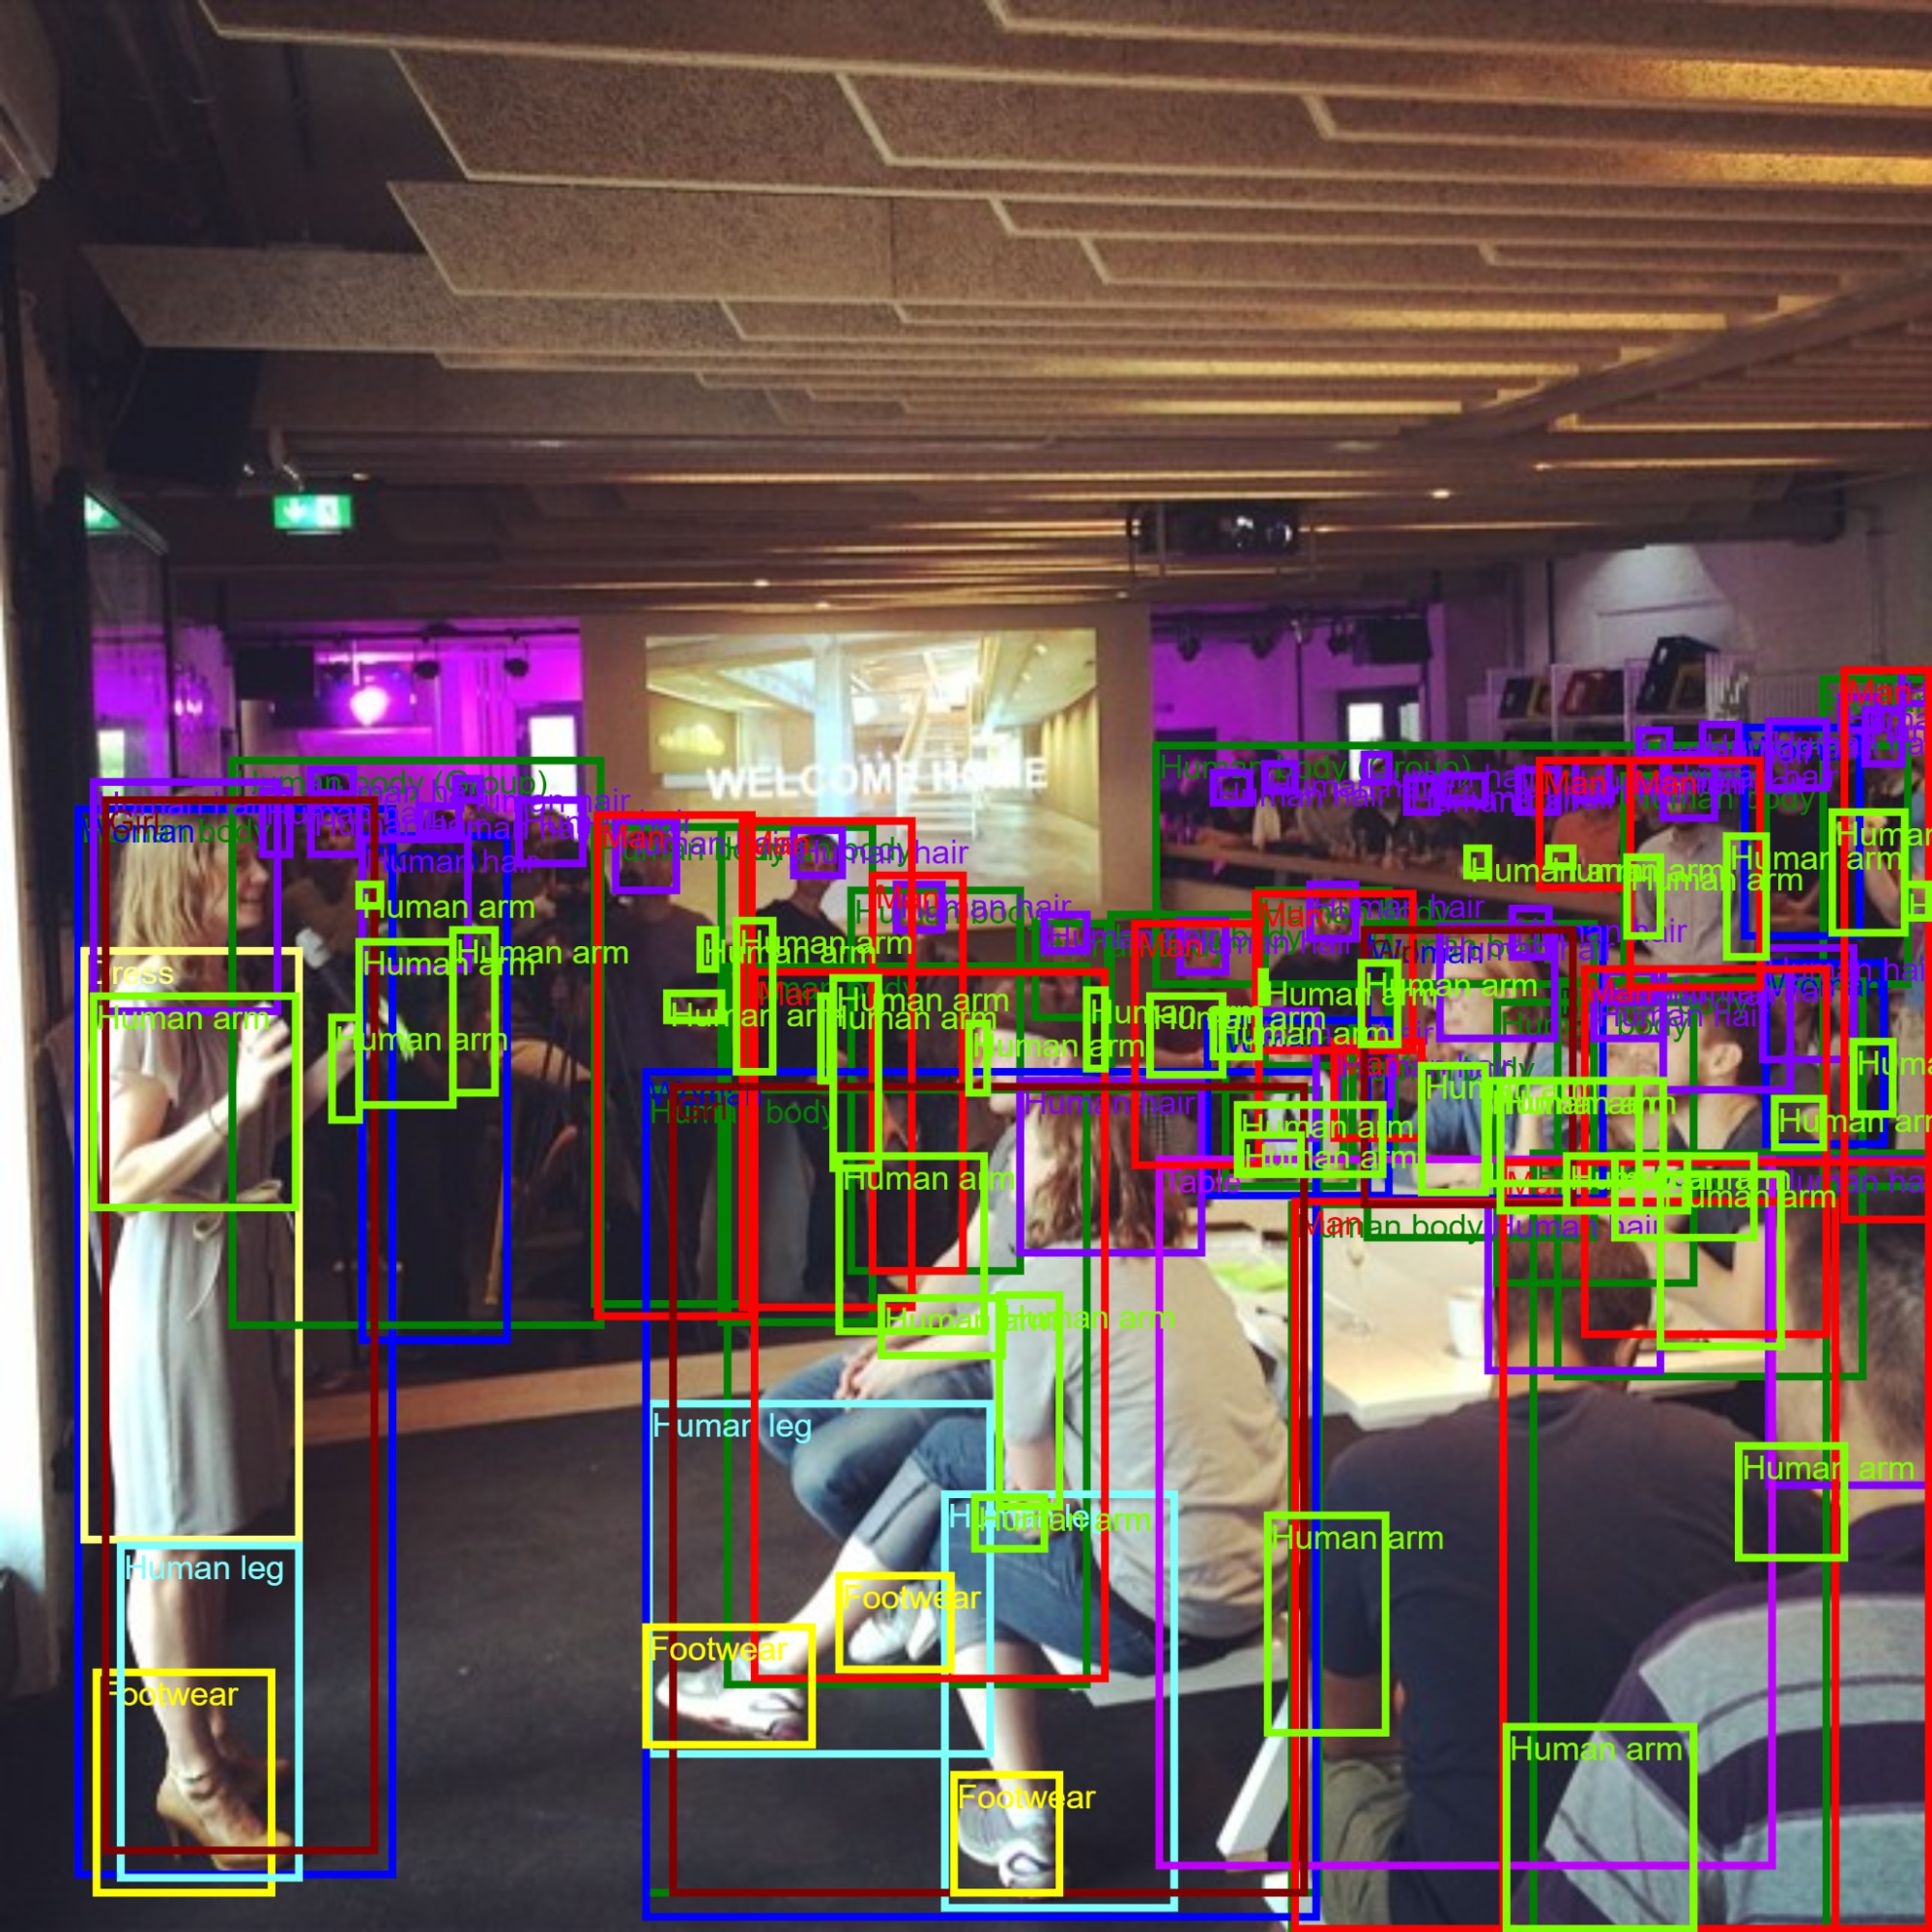 Photo from the OpenImage Dataset shows brightly colored bounding boxes around objects and people in a theater.